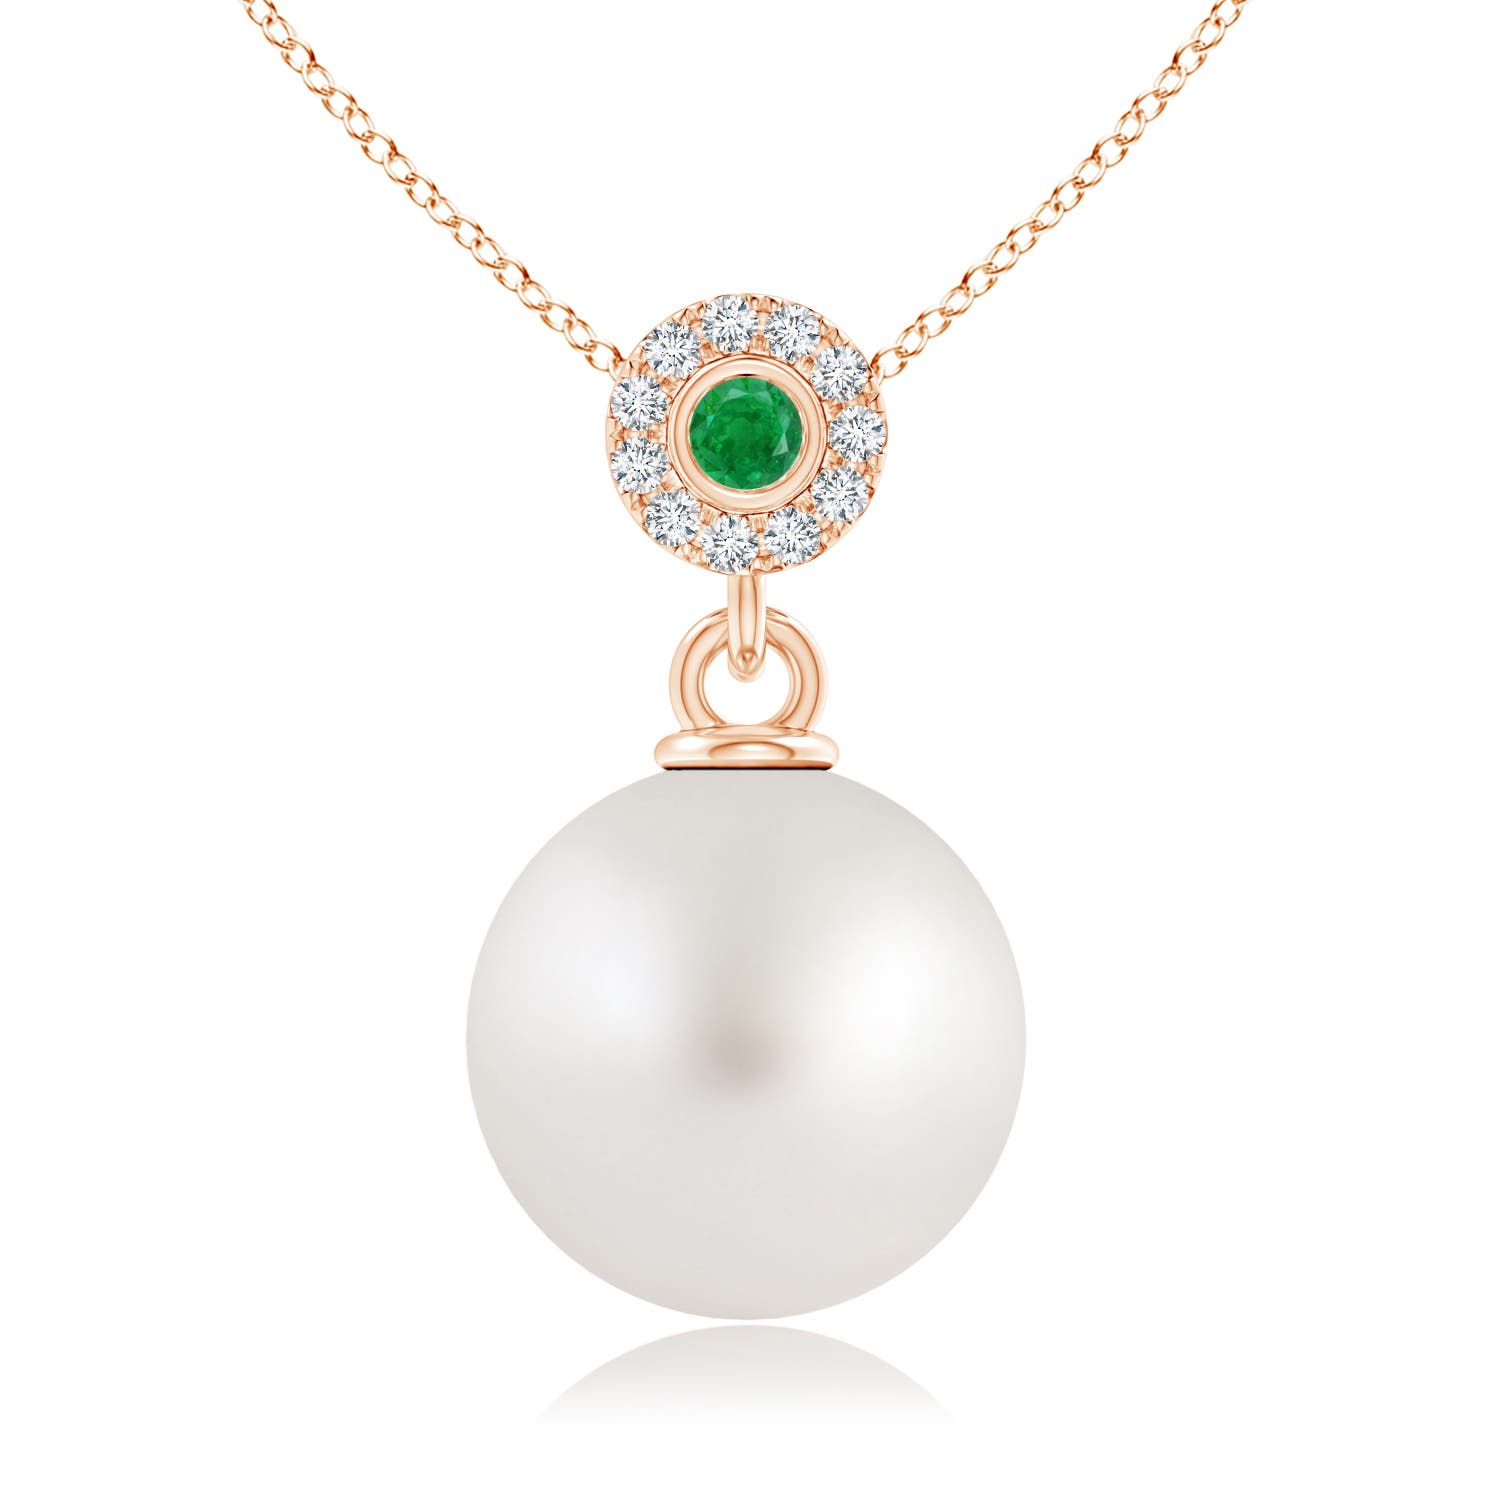 AA - South Sea Cultured Pearl / 7.3 CT / 14 KT Rose Gold